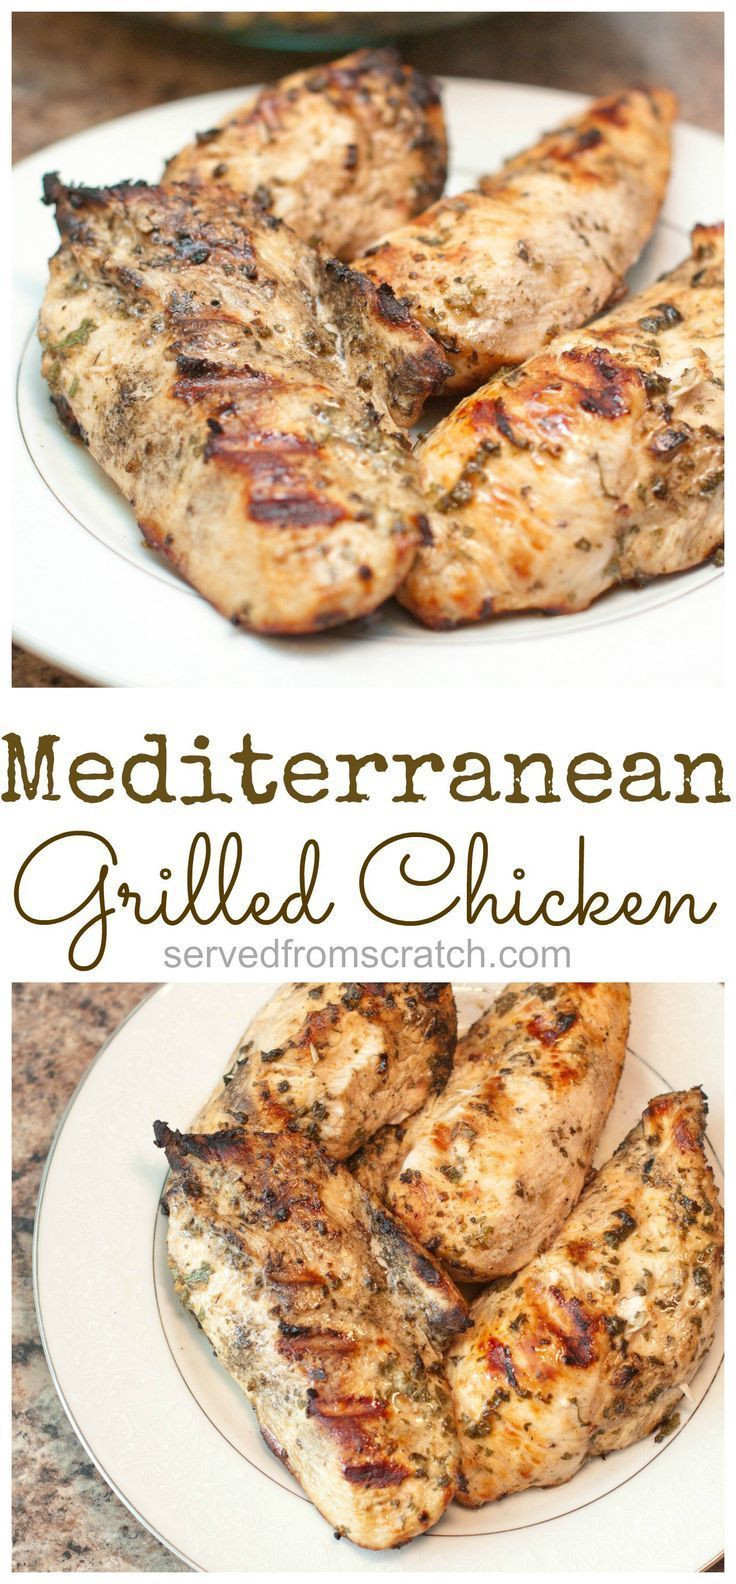 Diabetic Grilled Chicken Recipes
 25 best ideas about Grilled chicken strips on Pinterest